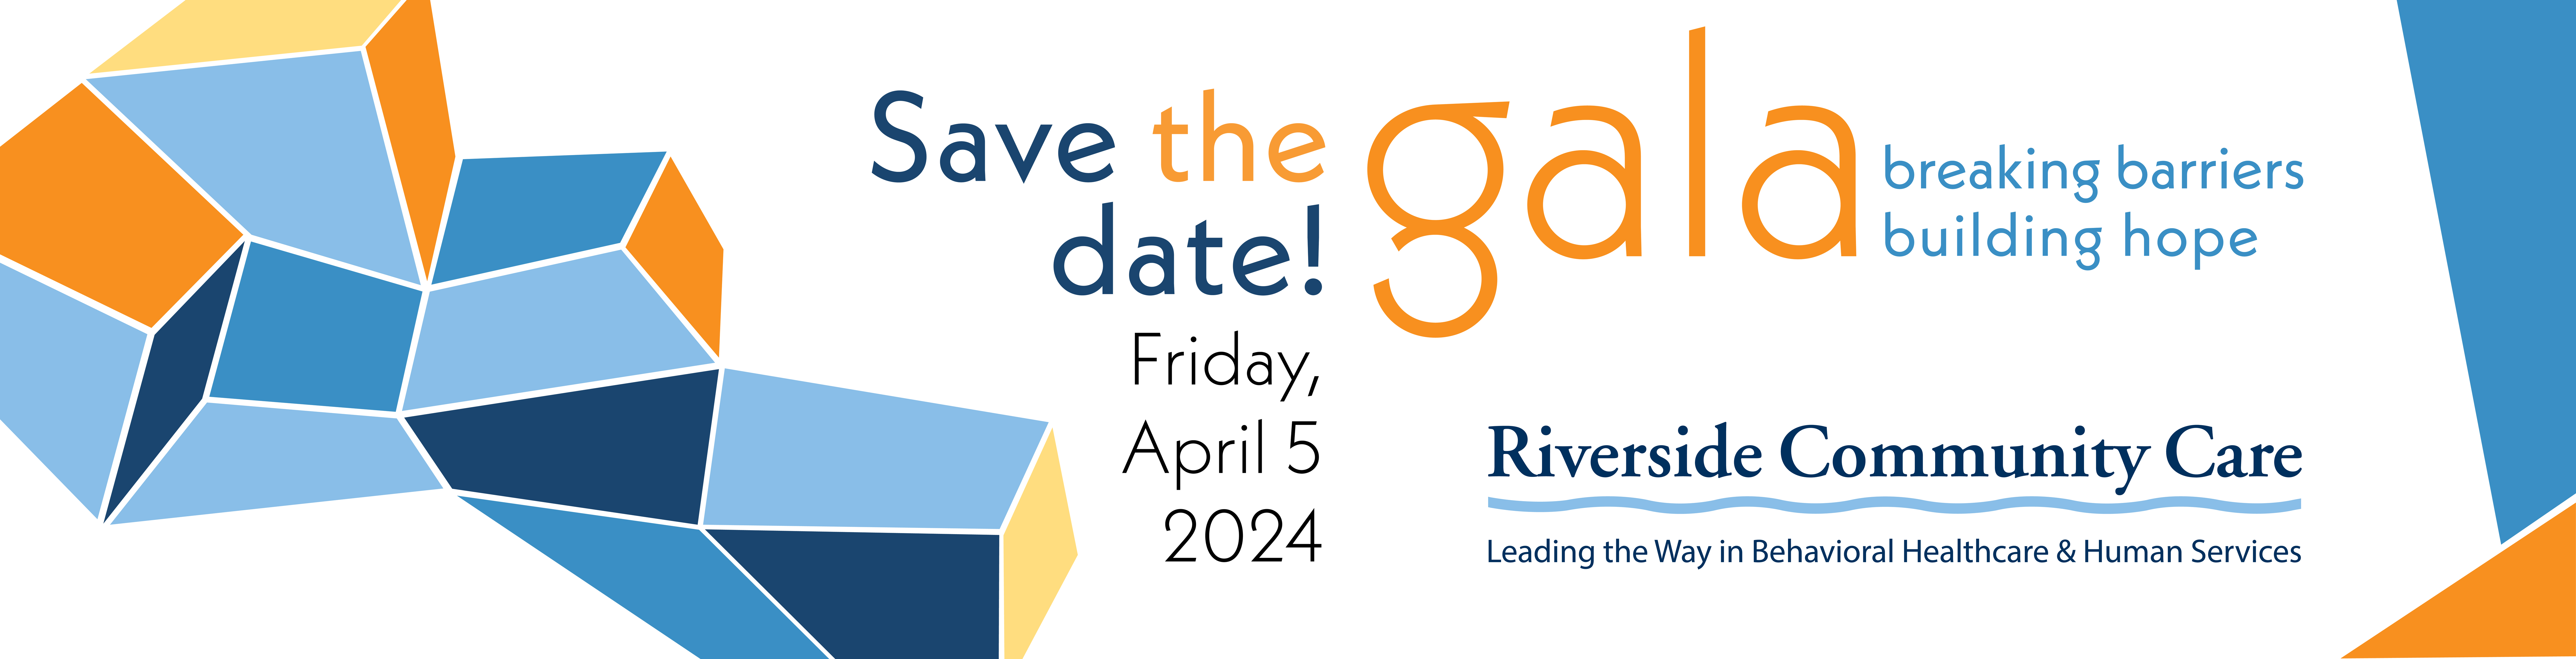 Save the Date Gala 2024